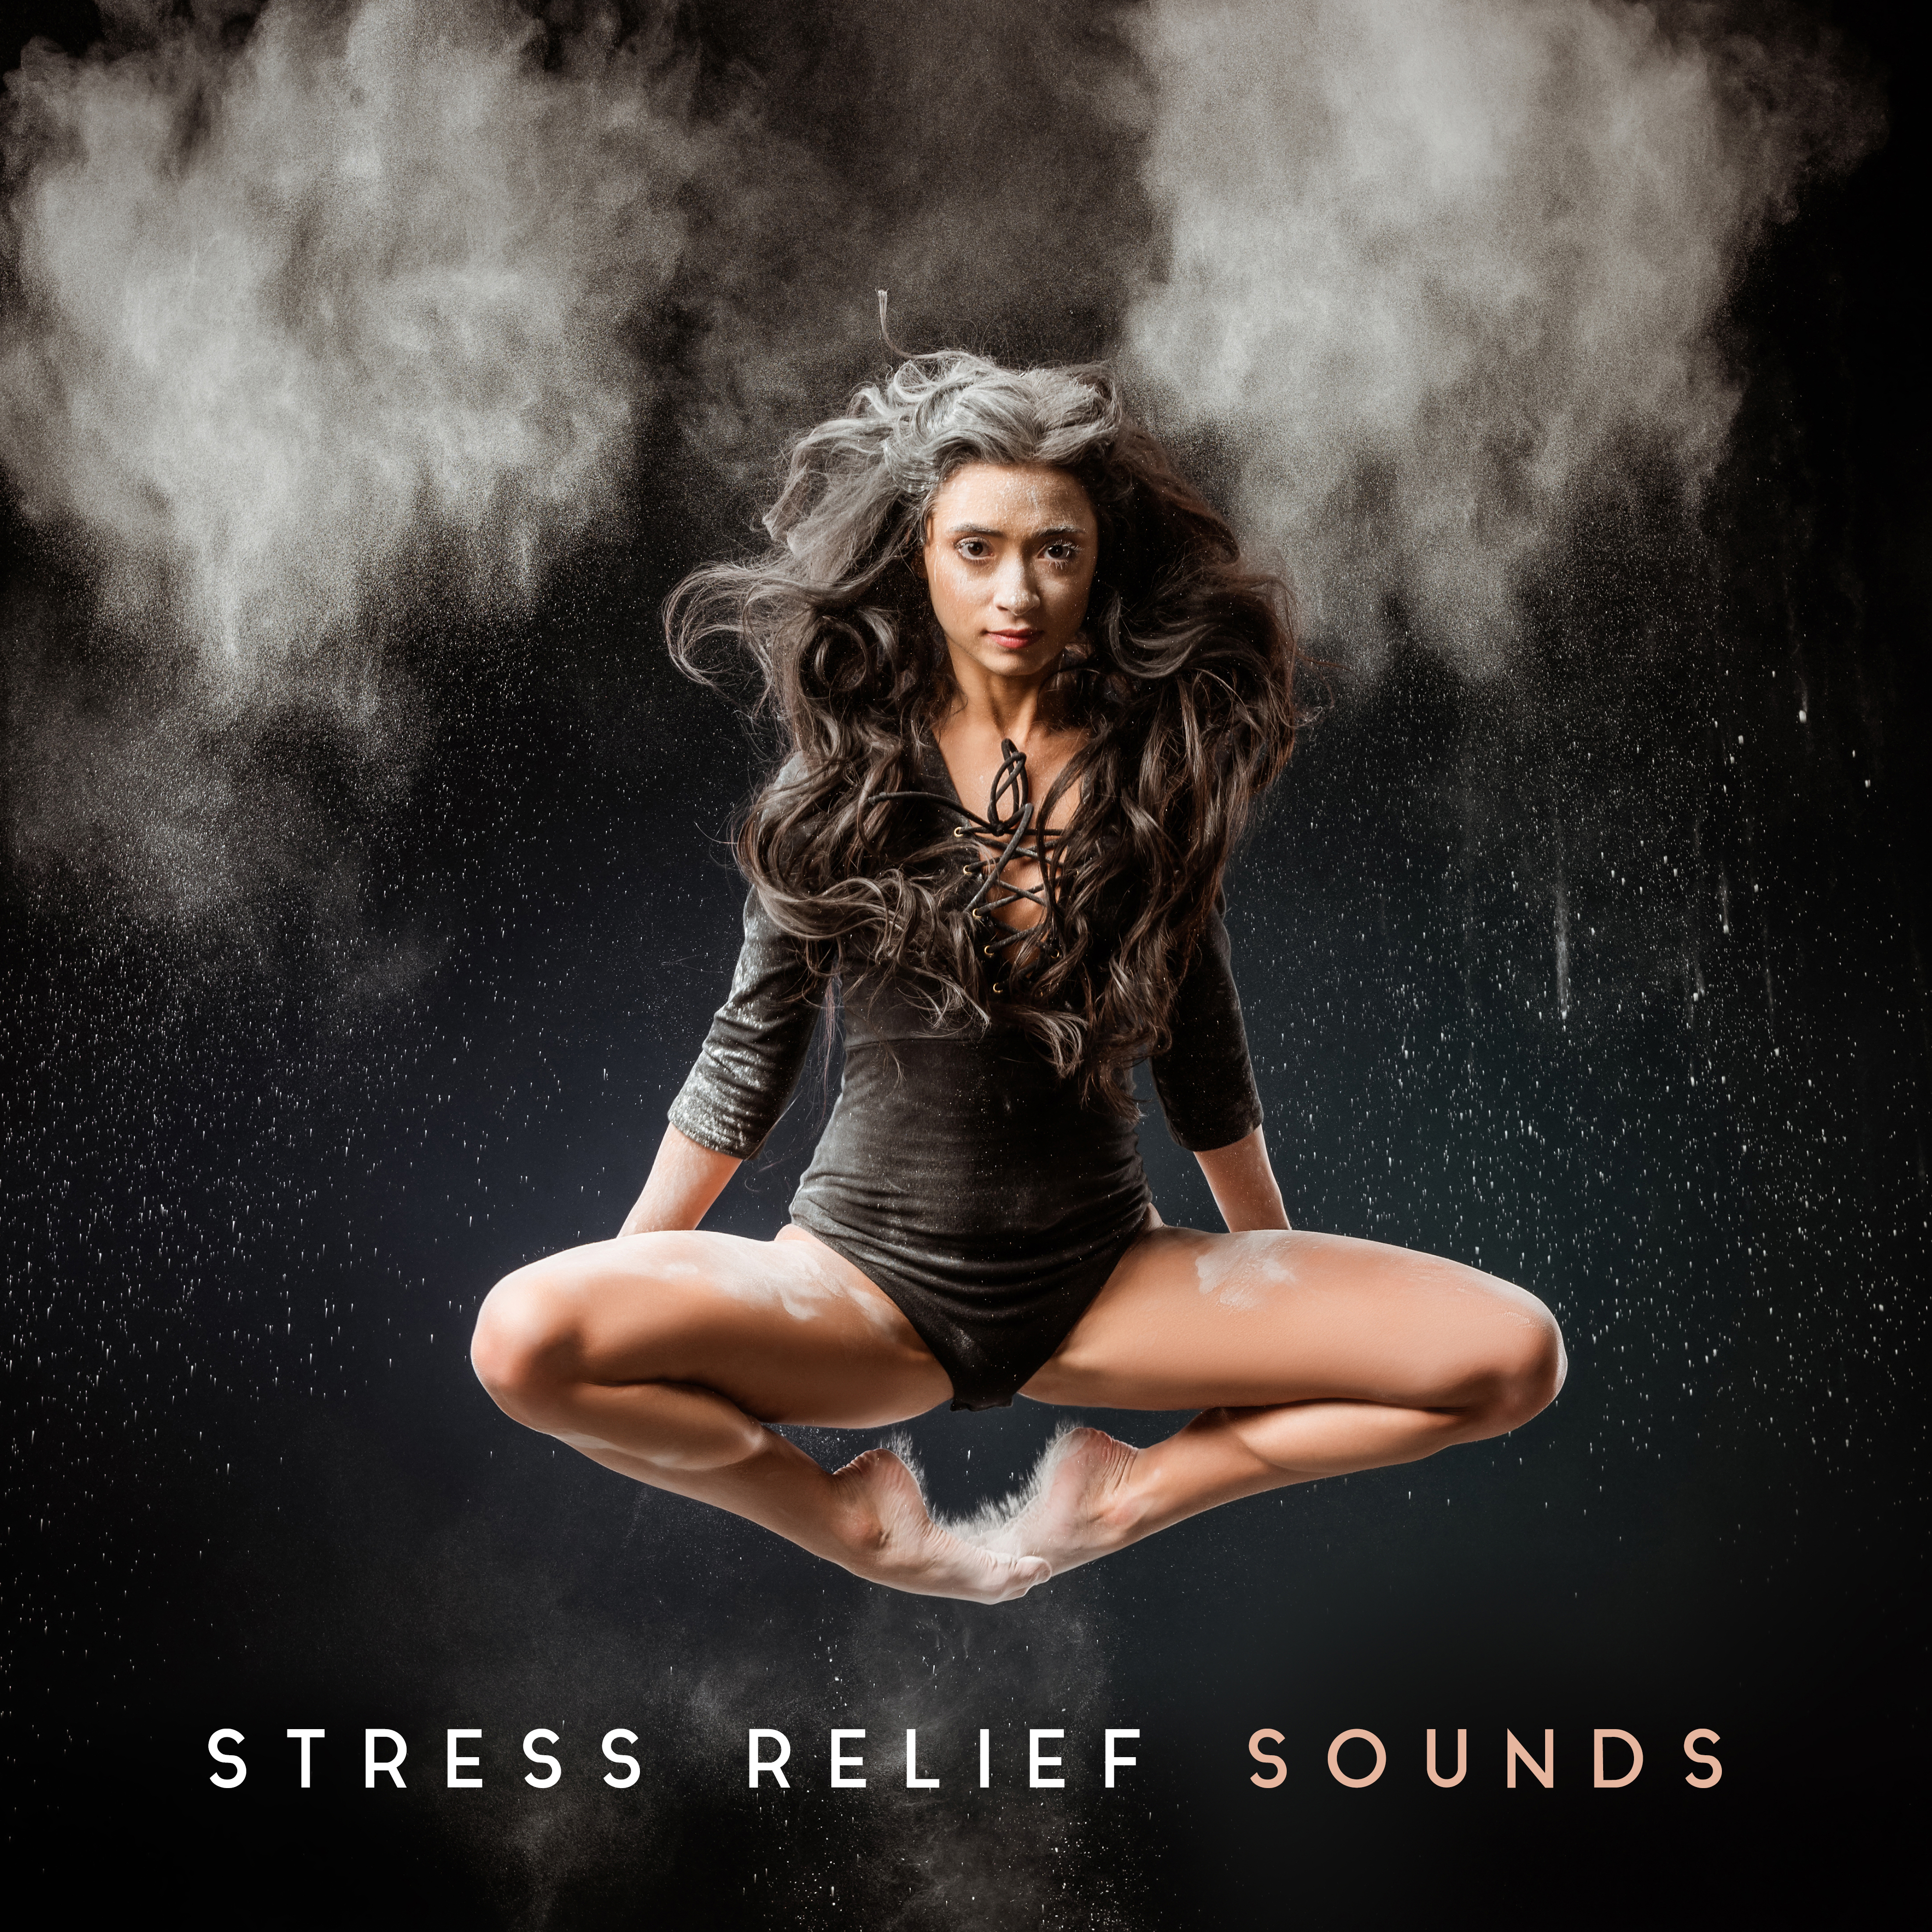 Stress Relief Sounds – Music for Deep Relaxation, Healing Melodies for Meditation, Yoga, Spa, Deeper Sleep